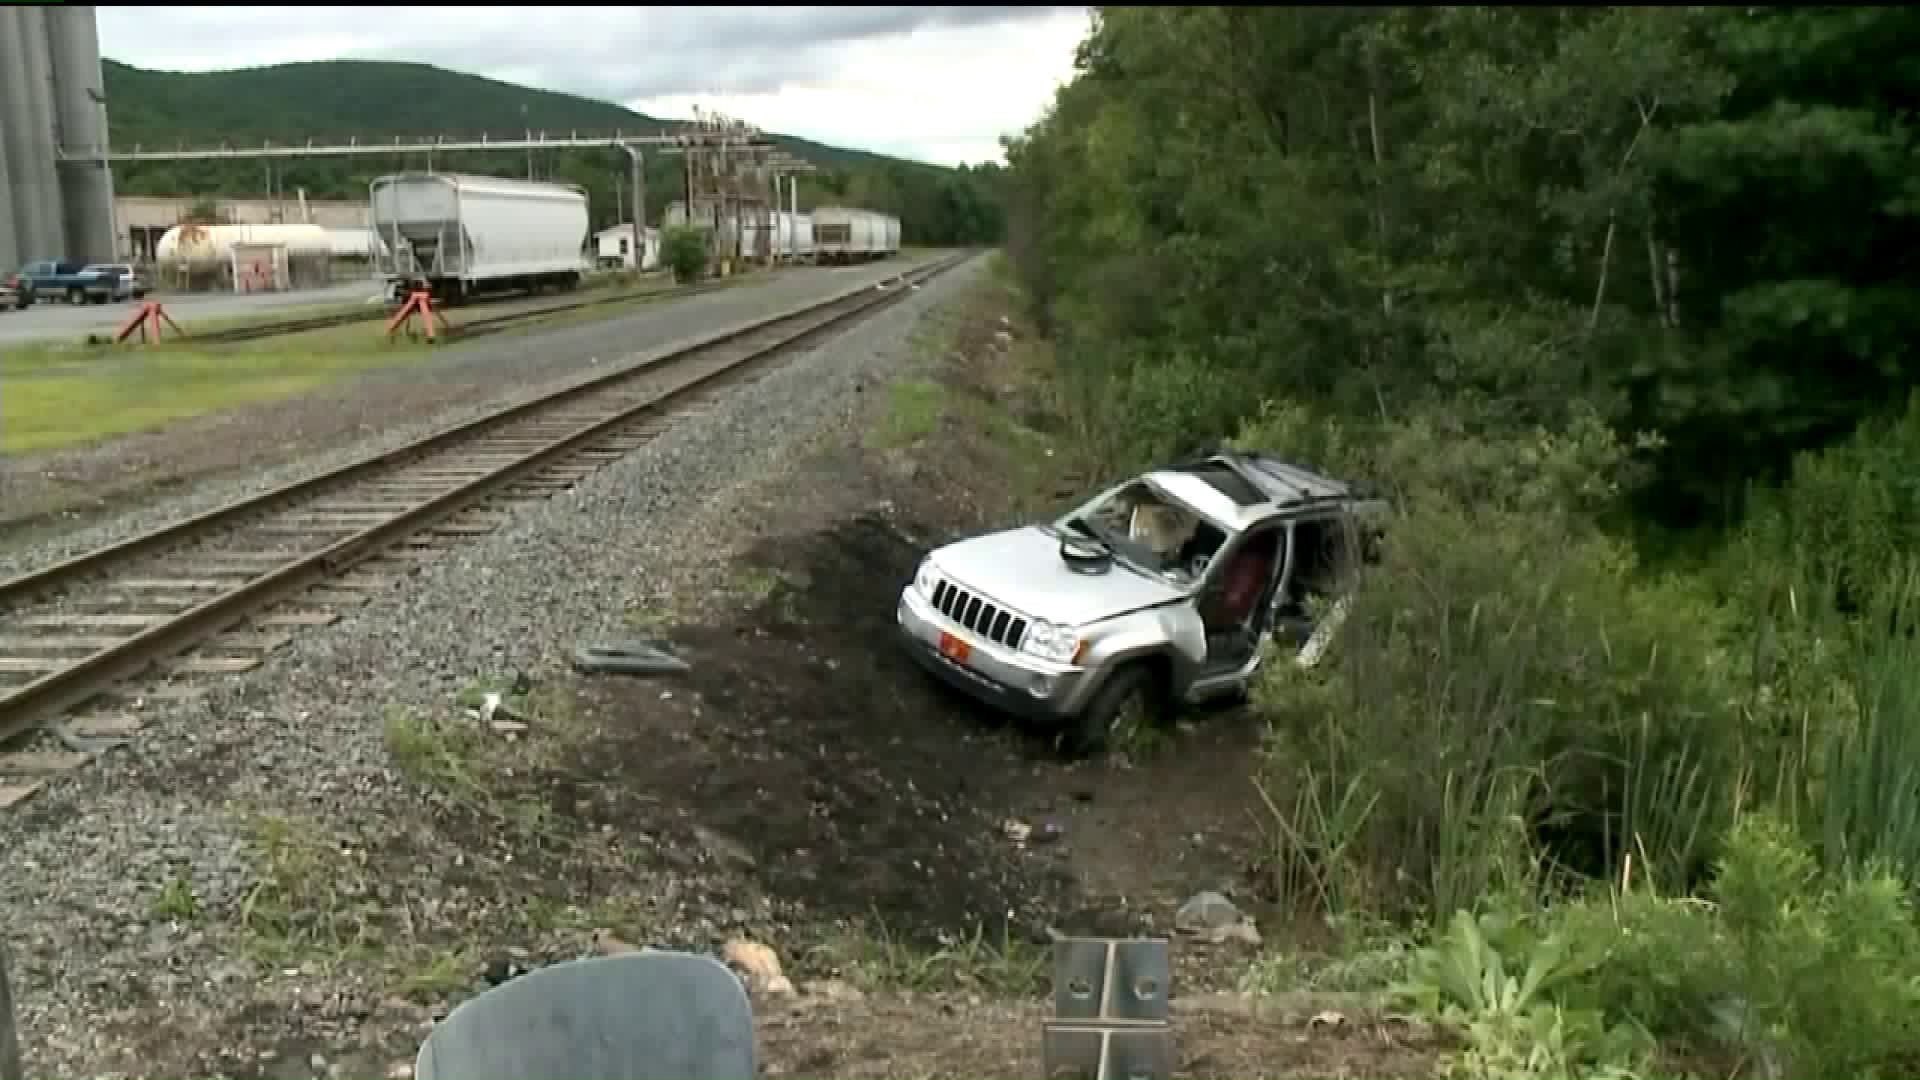 Driver Flown to Hospital after Collision with Train